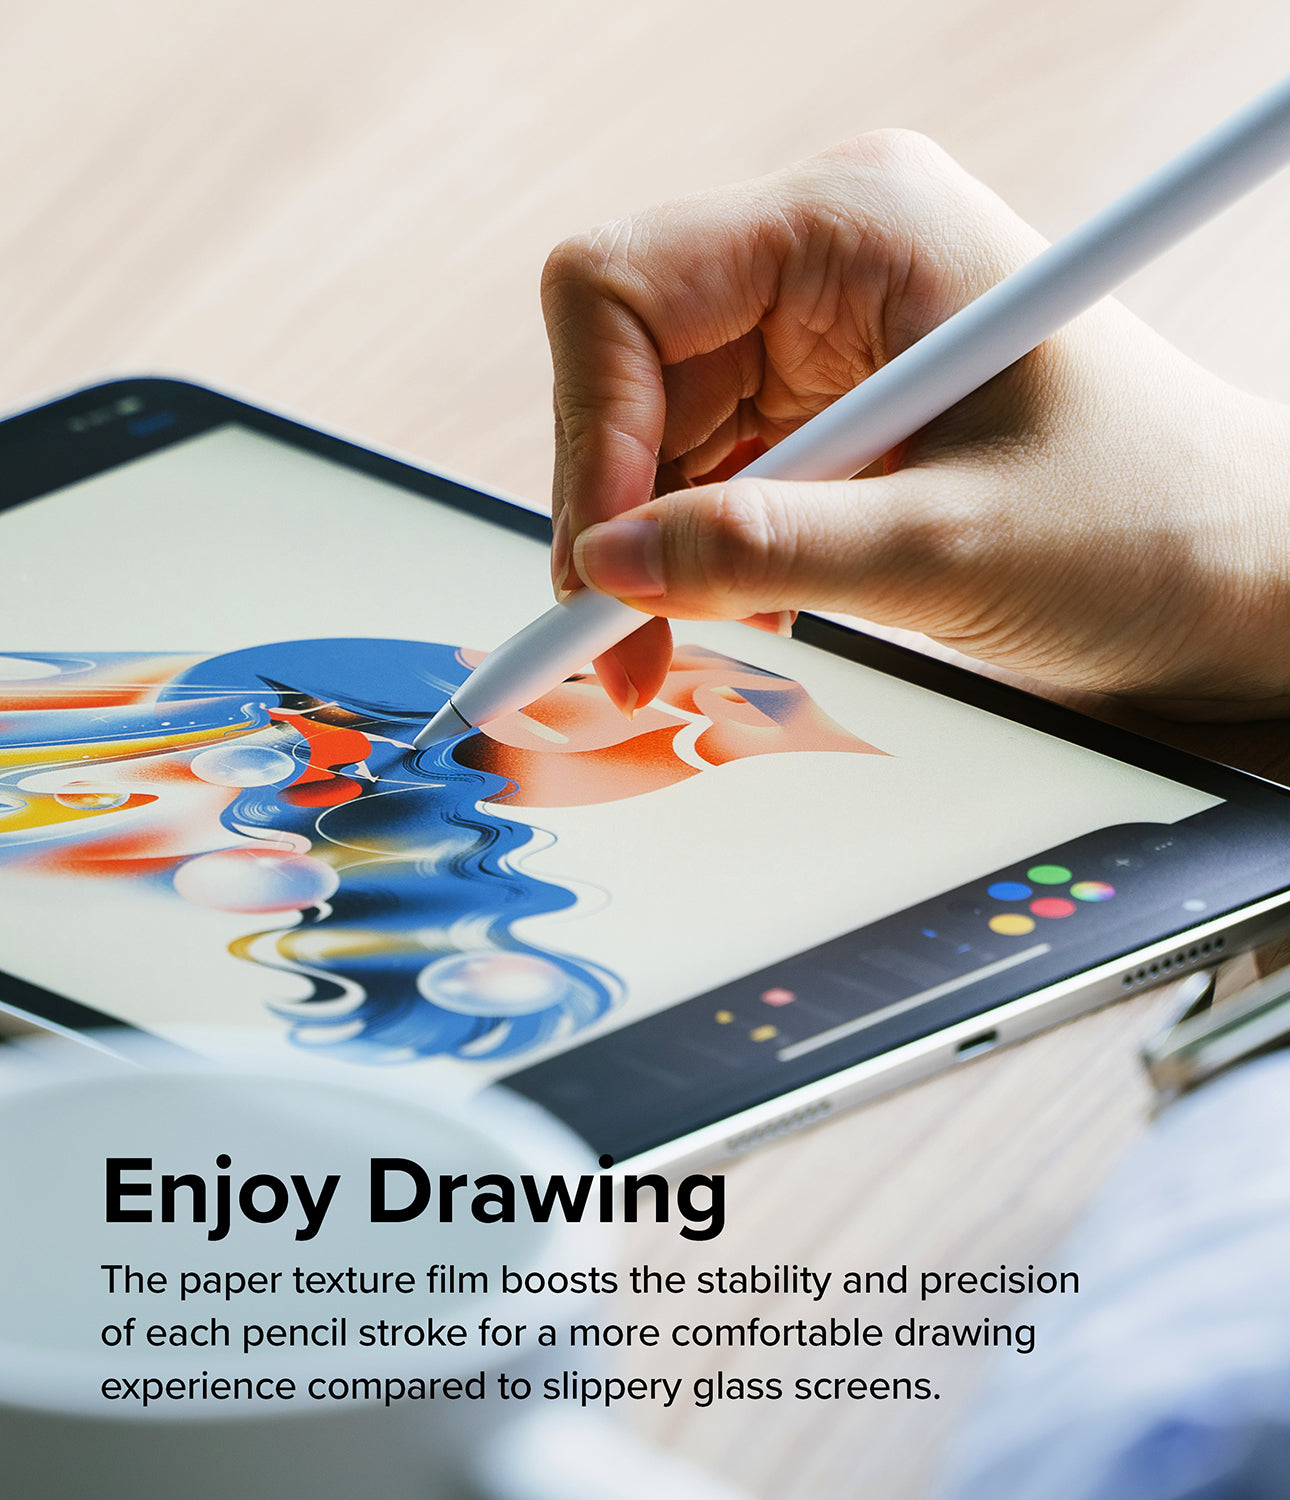 iPad Air 11" (M2) Screen Protector | Paper Touch Film - Hard - Enjoy Drawing. The paper texture film boosts the stability and precision of each pencil stroke for a more comfortable drawing experience compared to slippery glass screen.